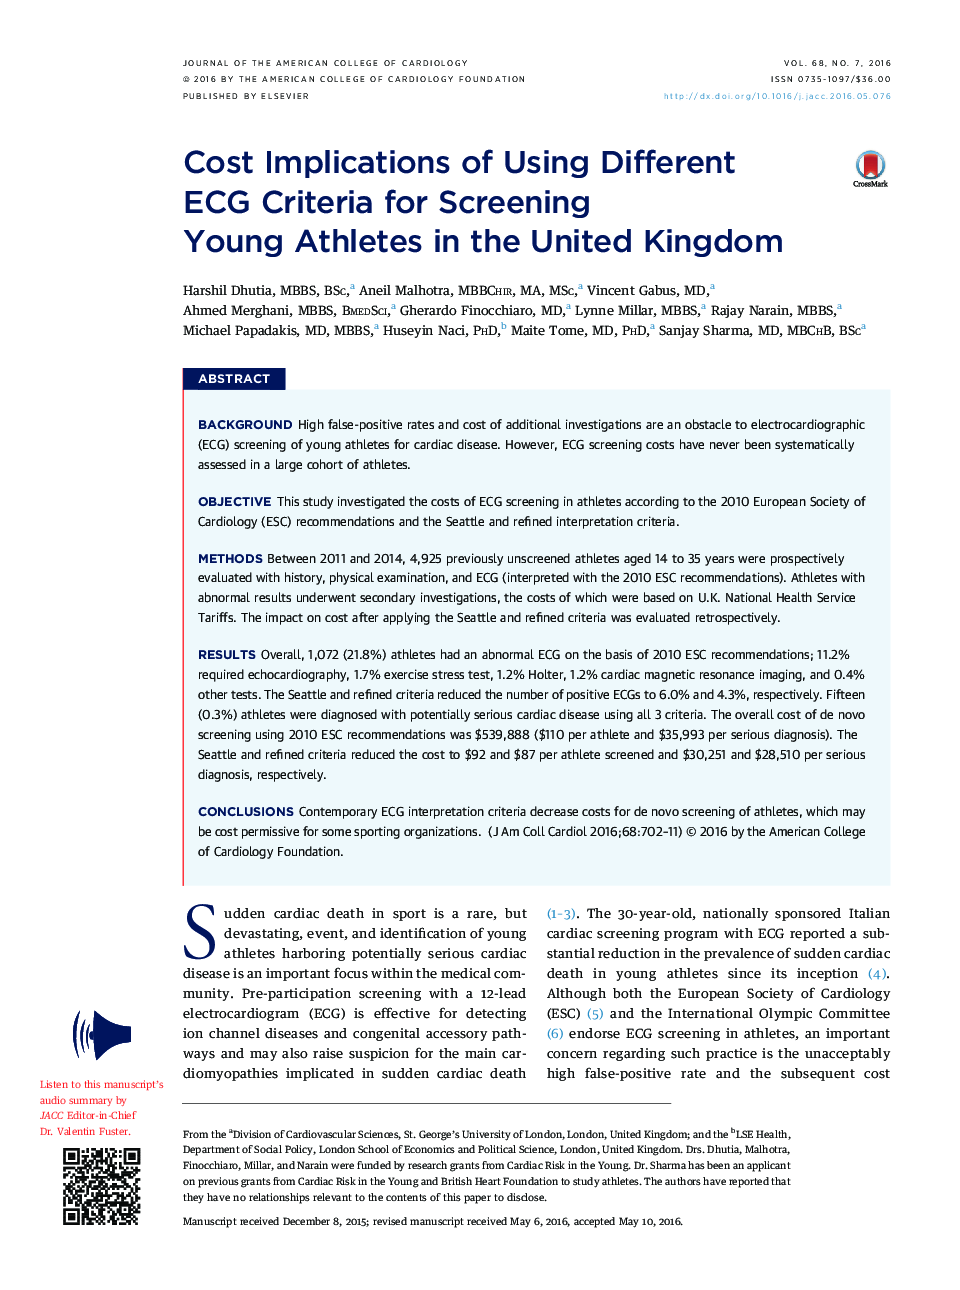 Cost Implications of Using Different ECG Criteria for Screening Young Athletes in the United Kingdom 